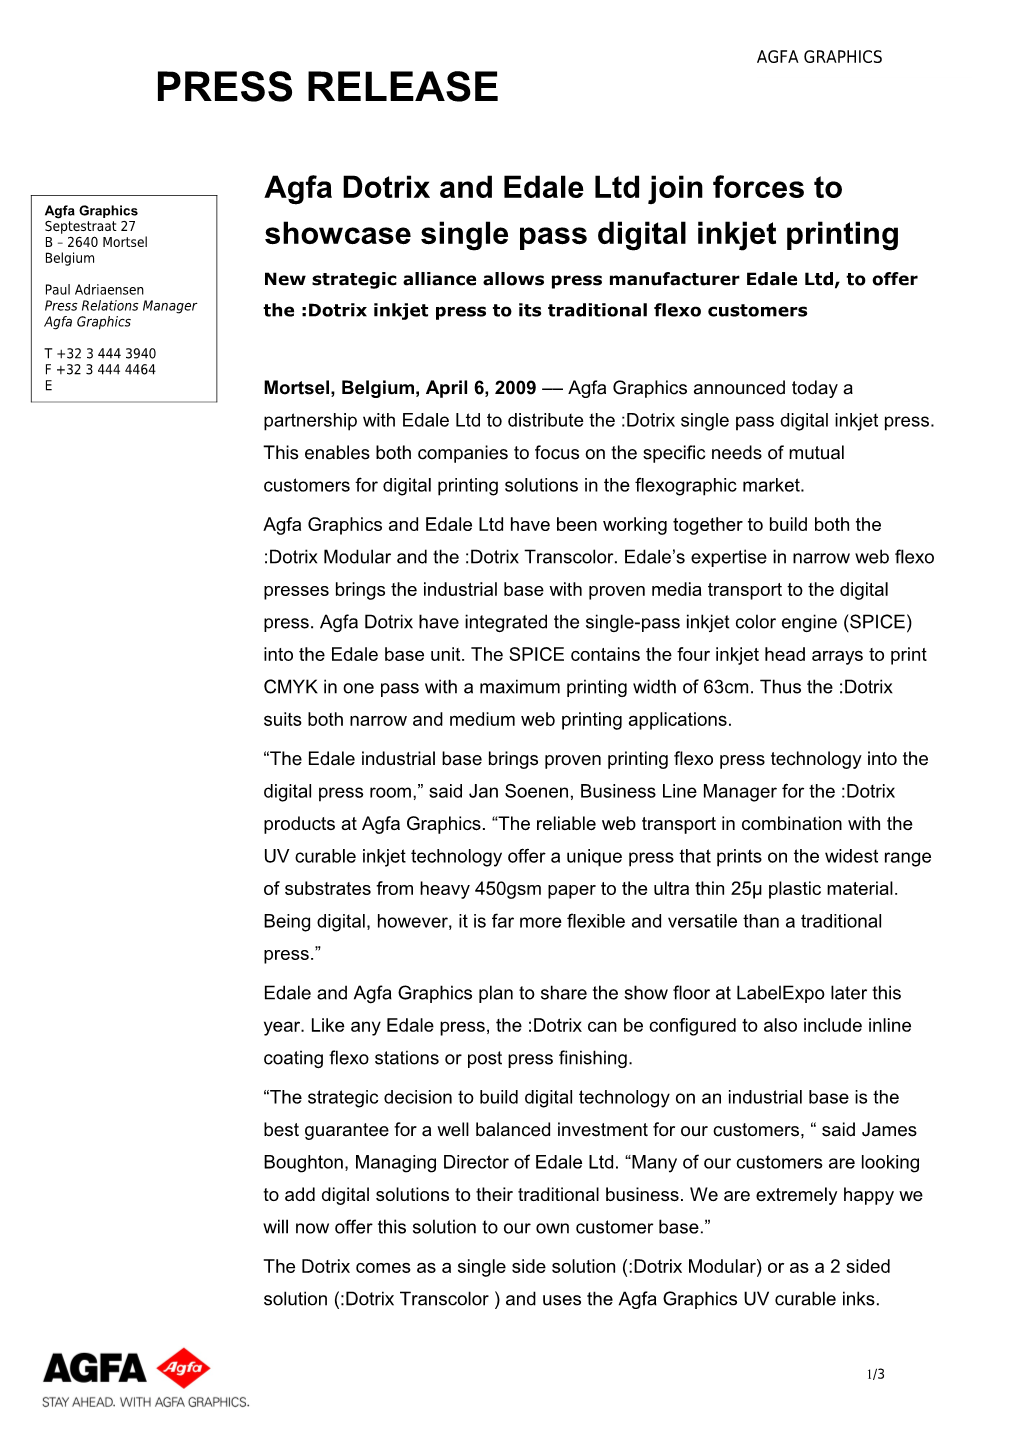 Agfa Dotrix and Edale Ltd Join Forces to Showcase Single Pass Digital Inkjet Printing